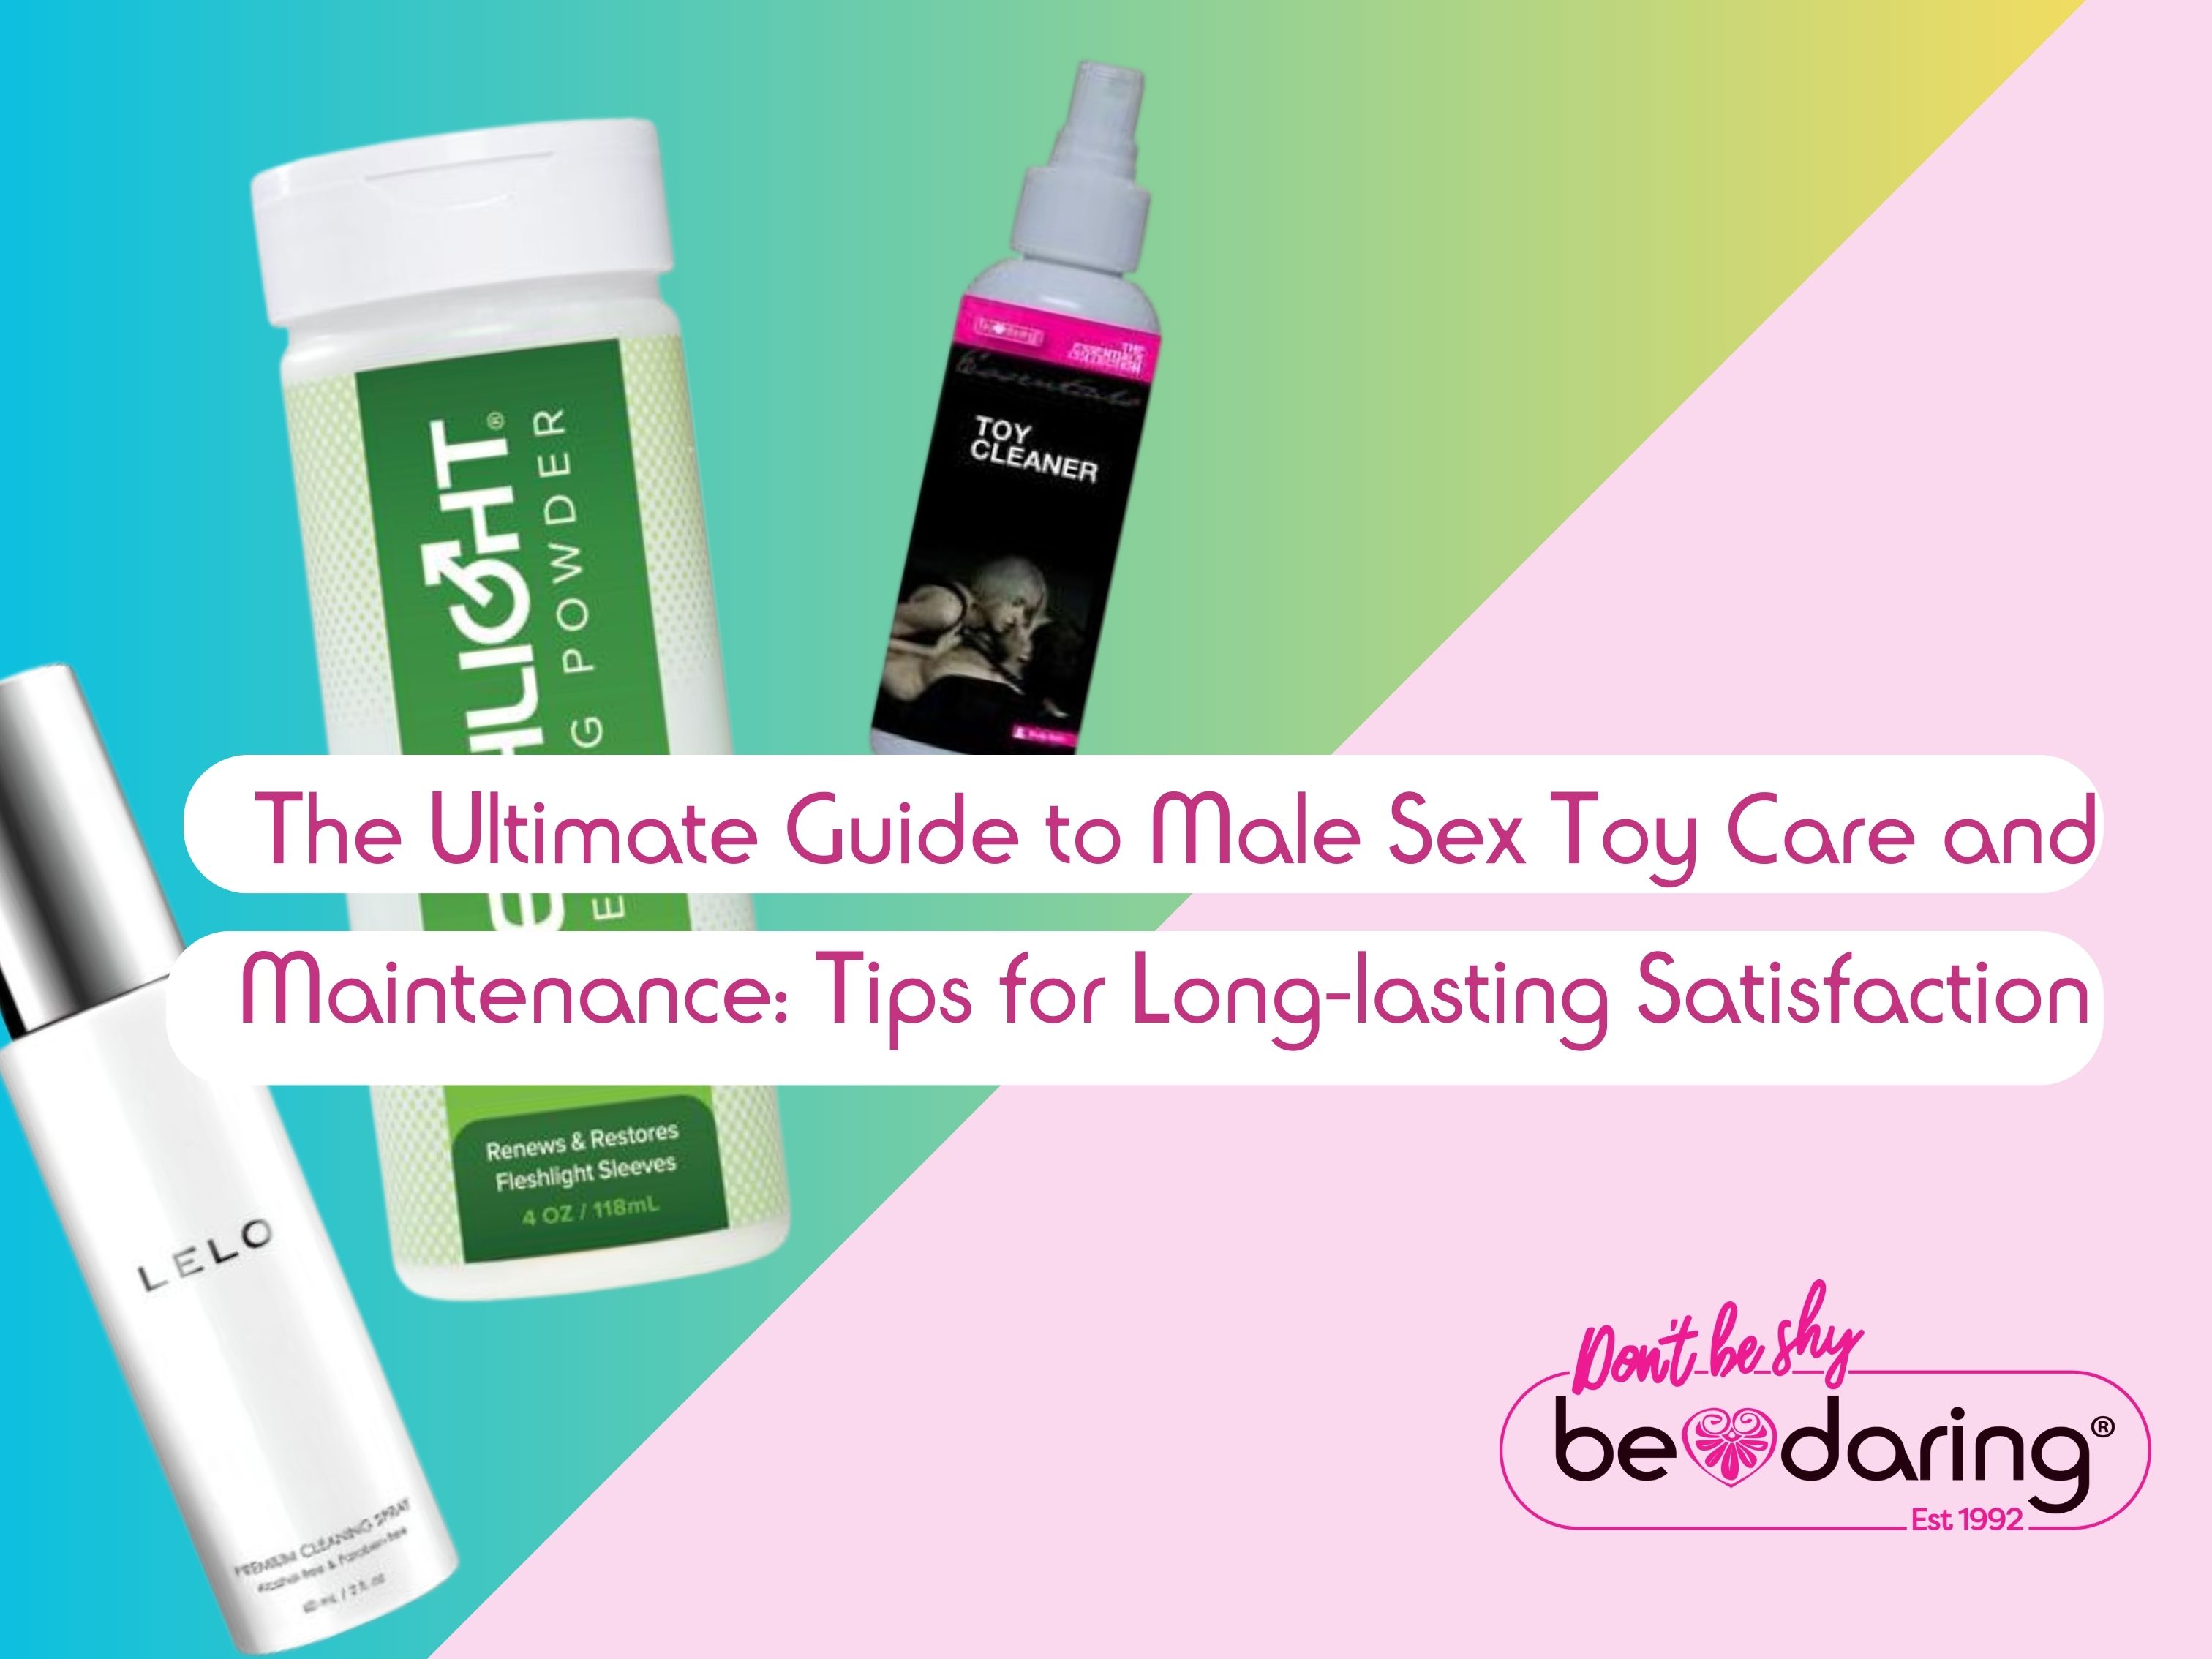 The Ultimate Guide to Male Sex Toy Care and Maintenance: Tips for Long-lasting Satisfaction